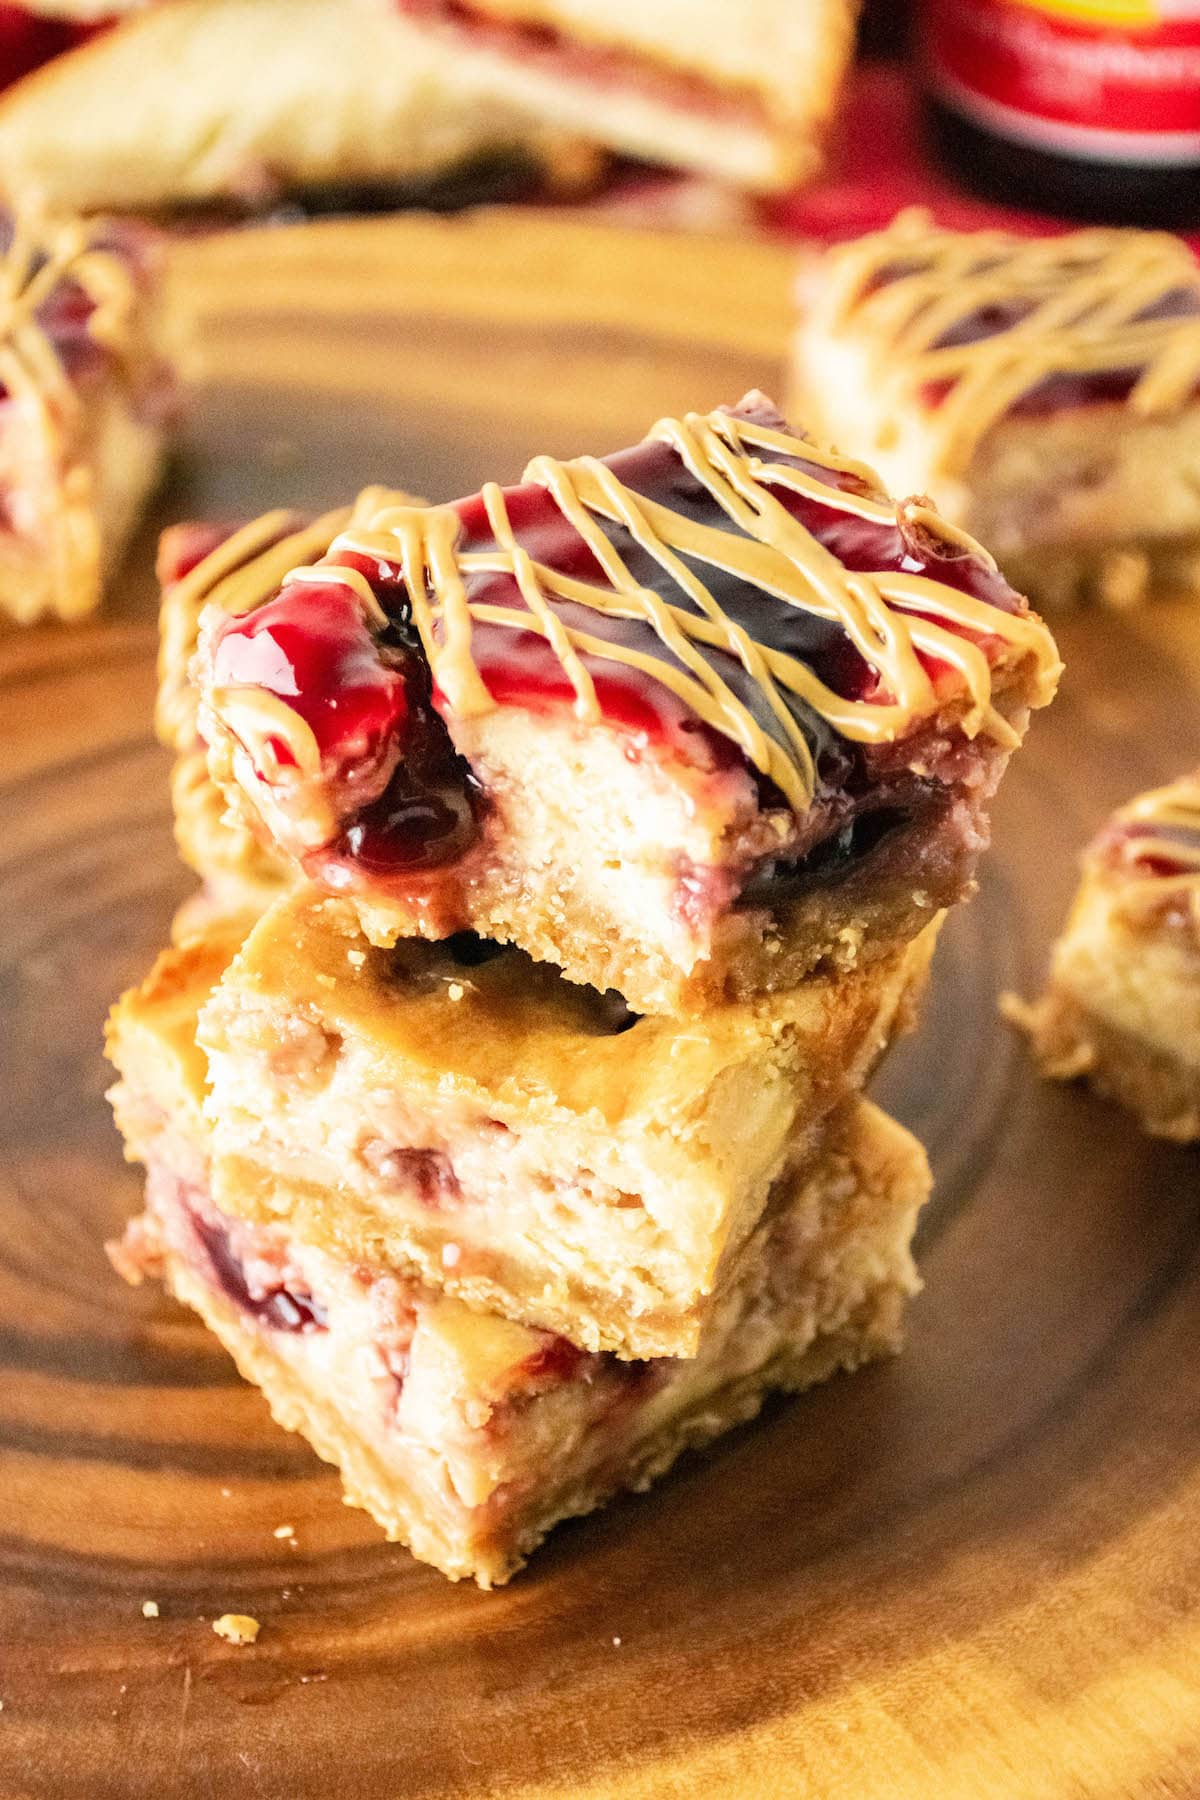 Easy Peanut Butter and Jelly Bars Recipe